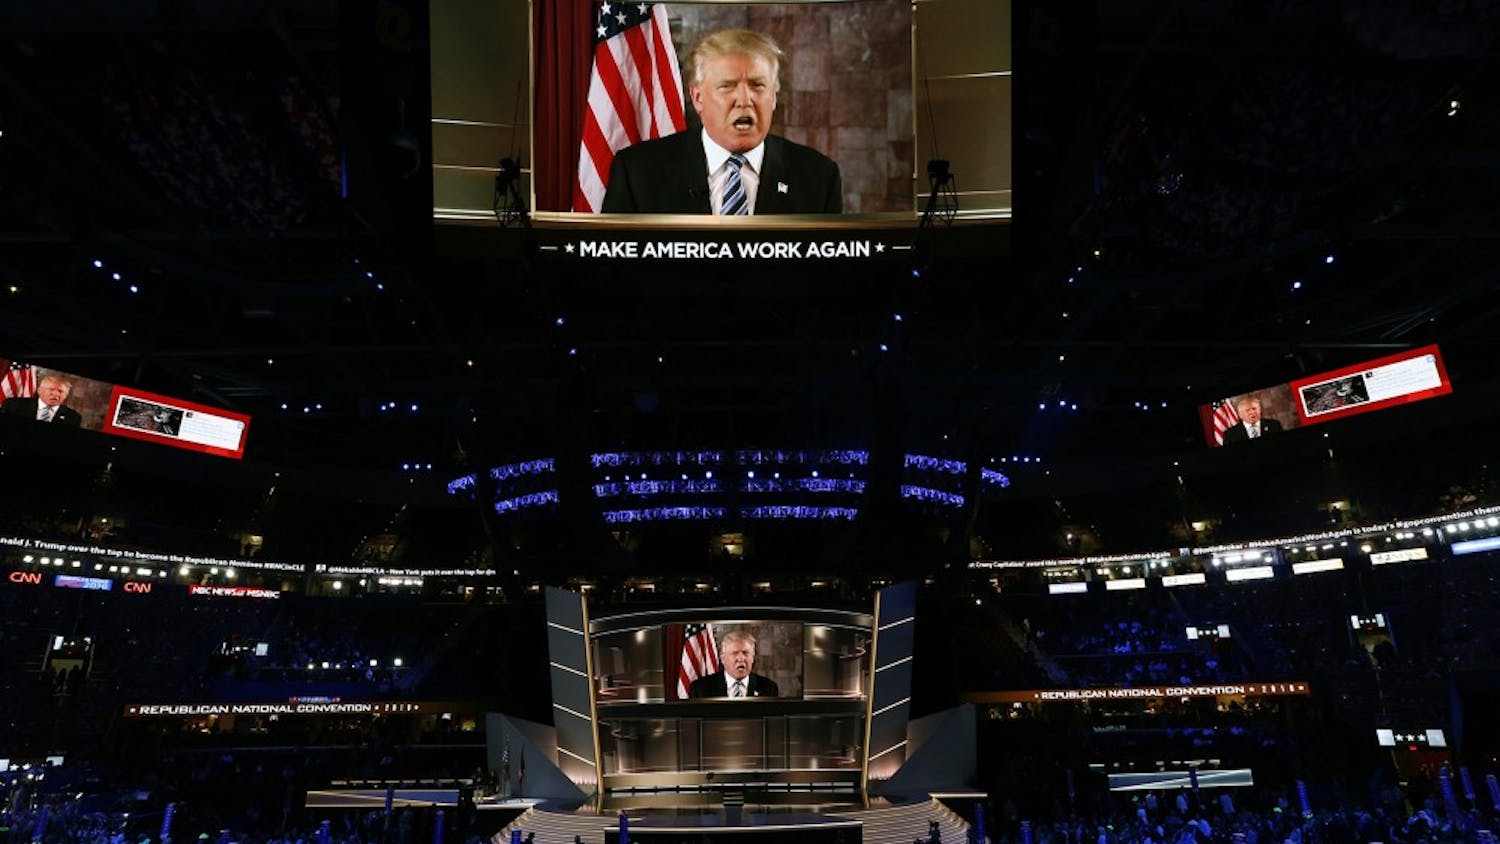 Republican Presidential nominee Donald Trump appears by satellite to address the delegates on the second day of the Republican National Convention on Tuesday, July 19, 2016, at Quicken Loans Arena in Cleveland. (Carolyn Cole/Los Angeles Times/TNS)